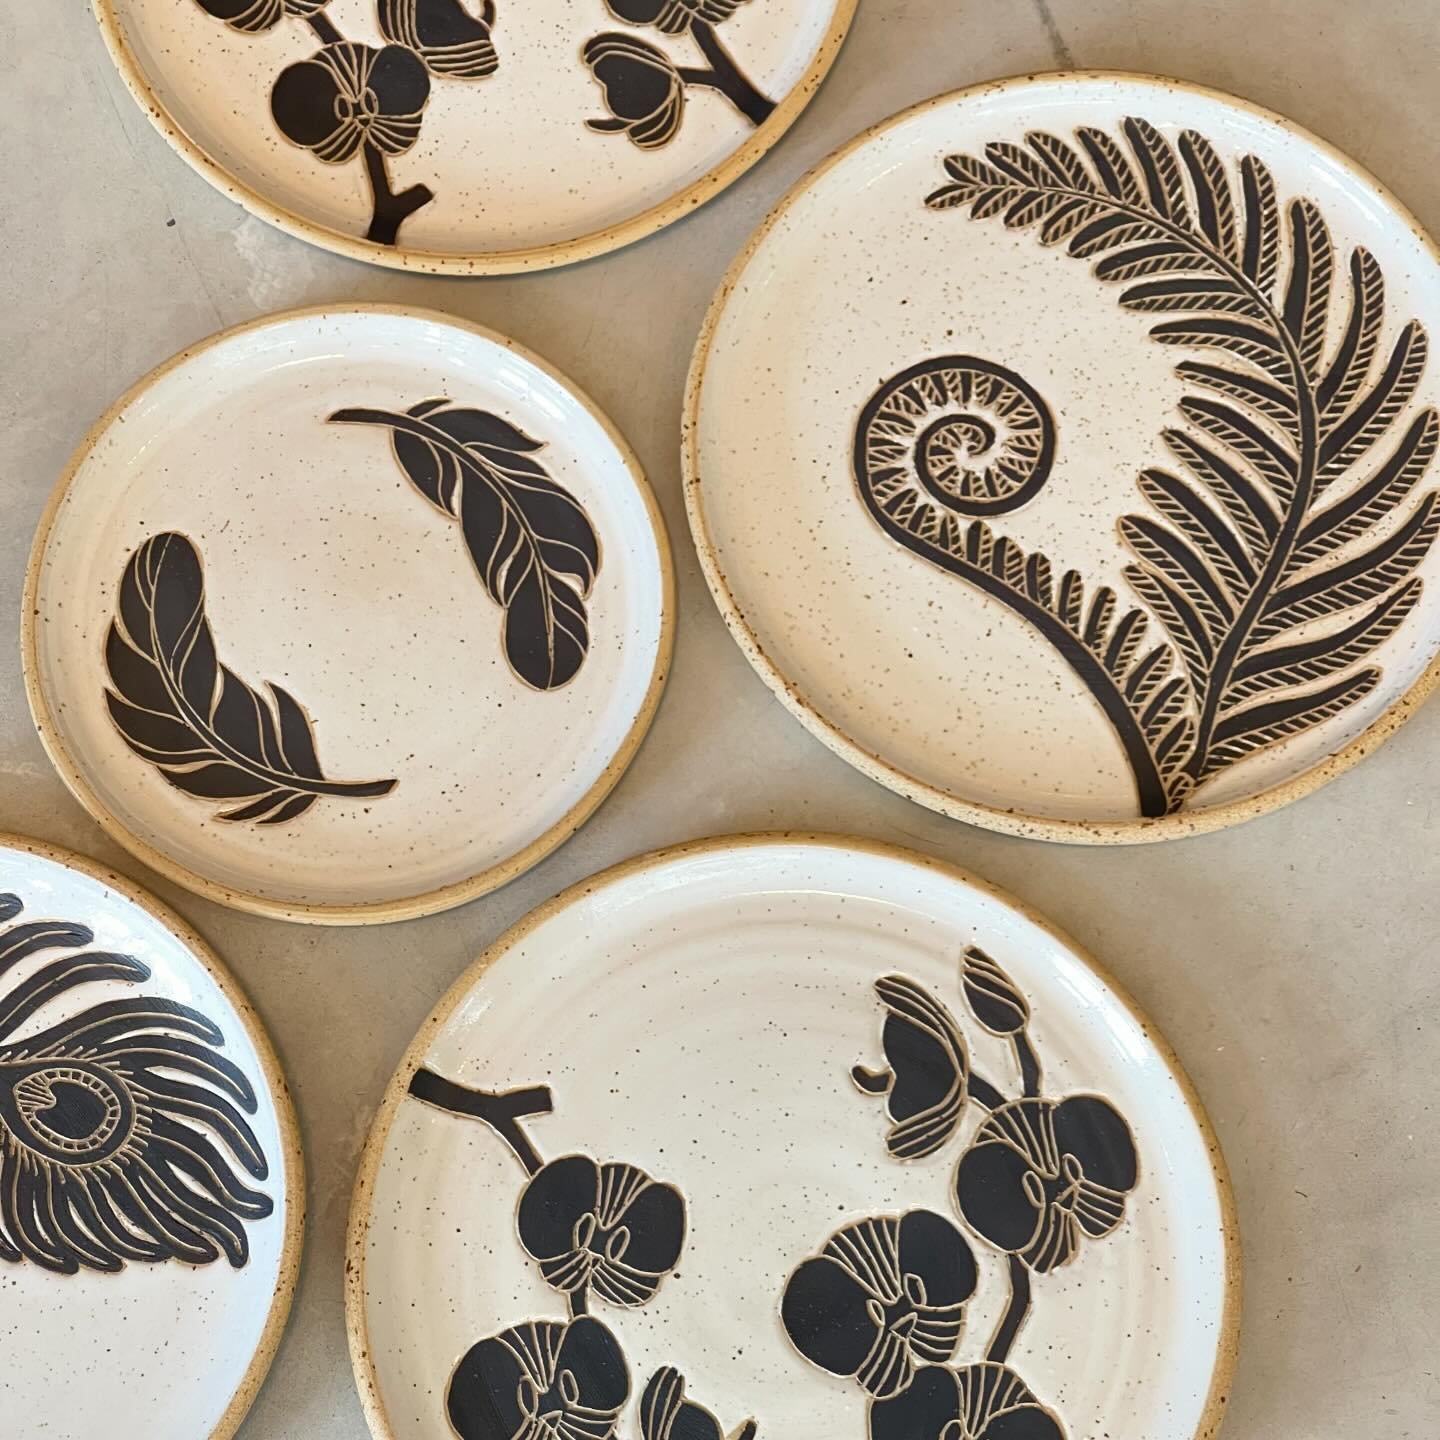 First of the black&amp;white nature inspired wall plates are done. Eventually these will go to @bespoketruckee 
It's been fun decorating in this morning re loose style!